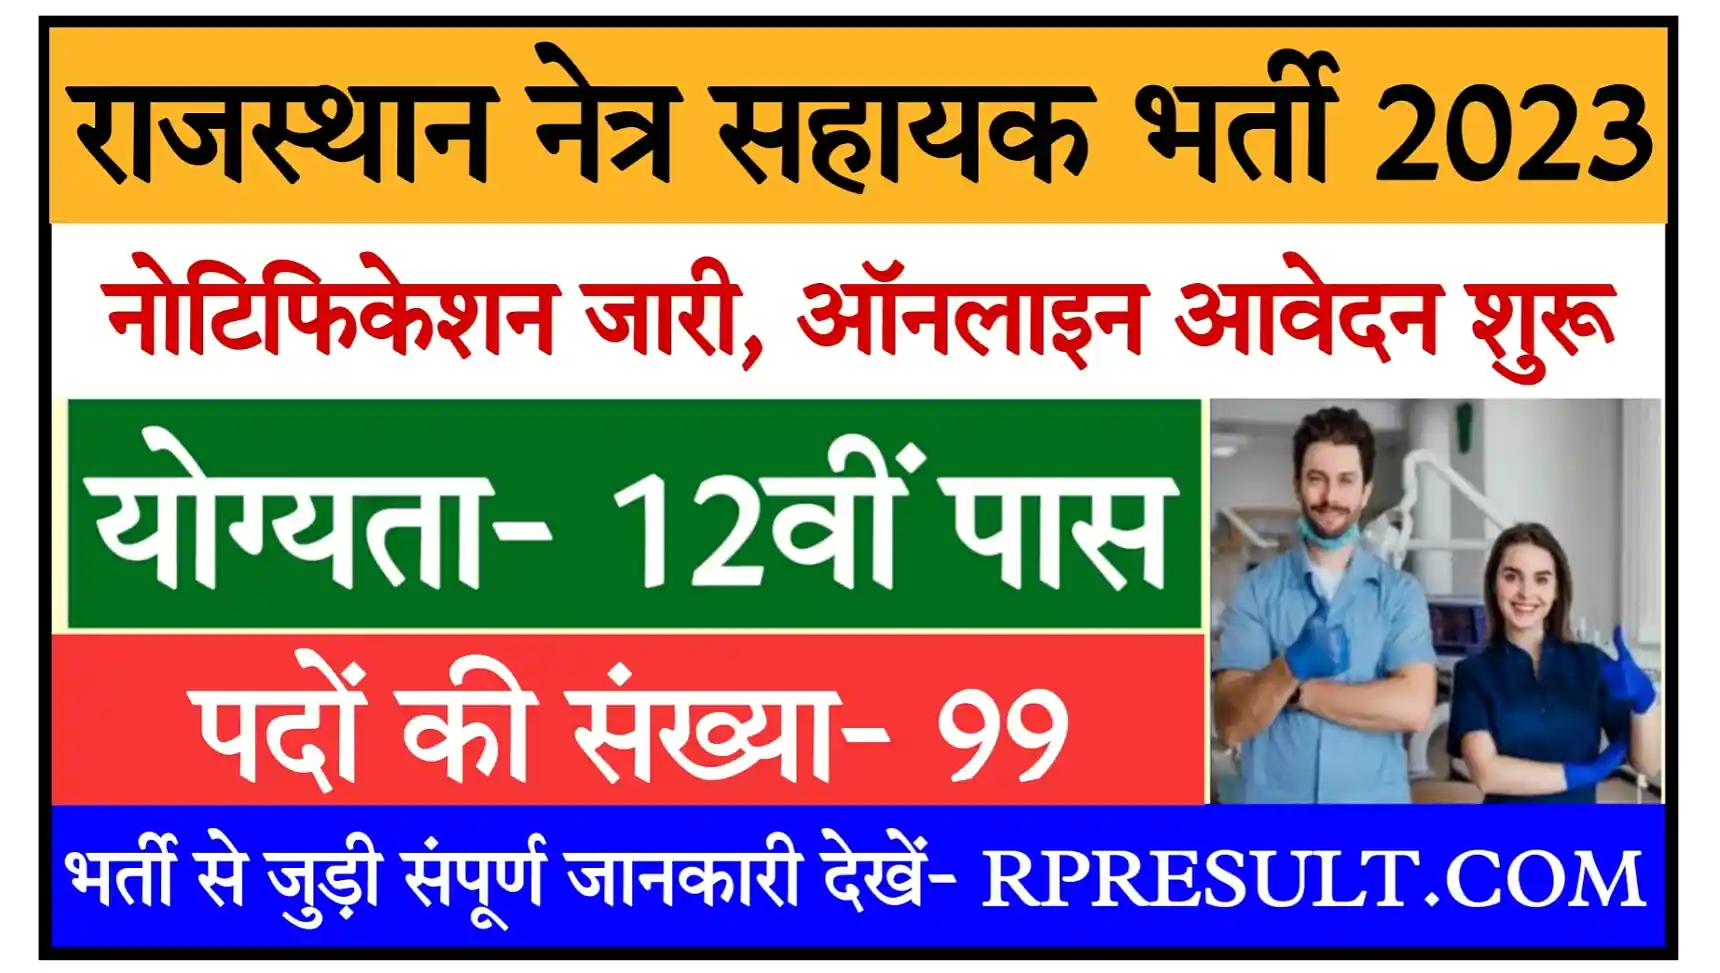 Rajasthan Ophthalmic Assistant Recruitment 2023 Notification, Apply Online @rajswasthya.nic.in